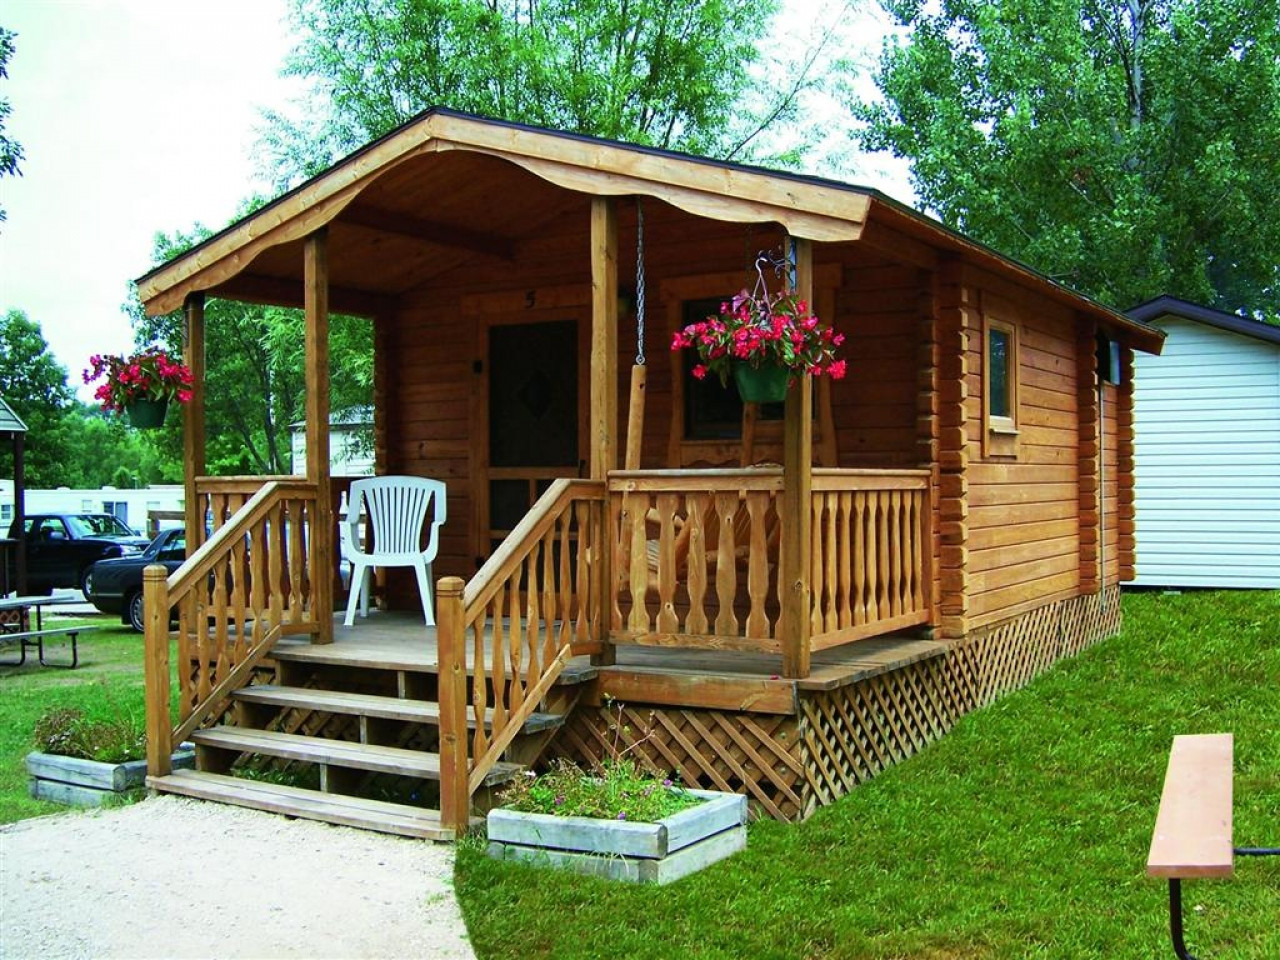 Small 1 Bedroom House
 Small e Bedroom Cabins Small Cabin Kits one bedroom log